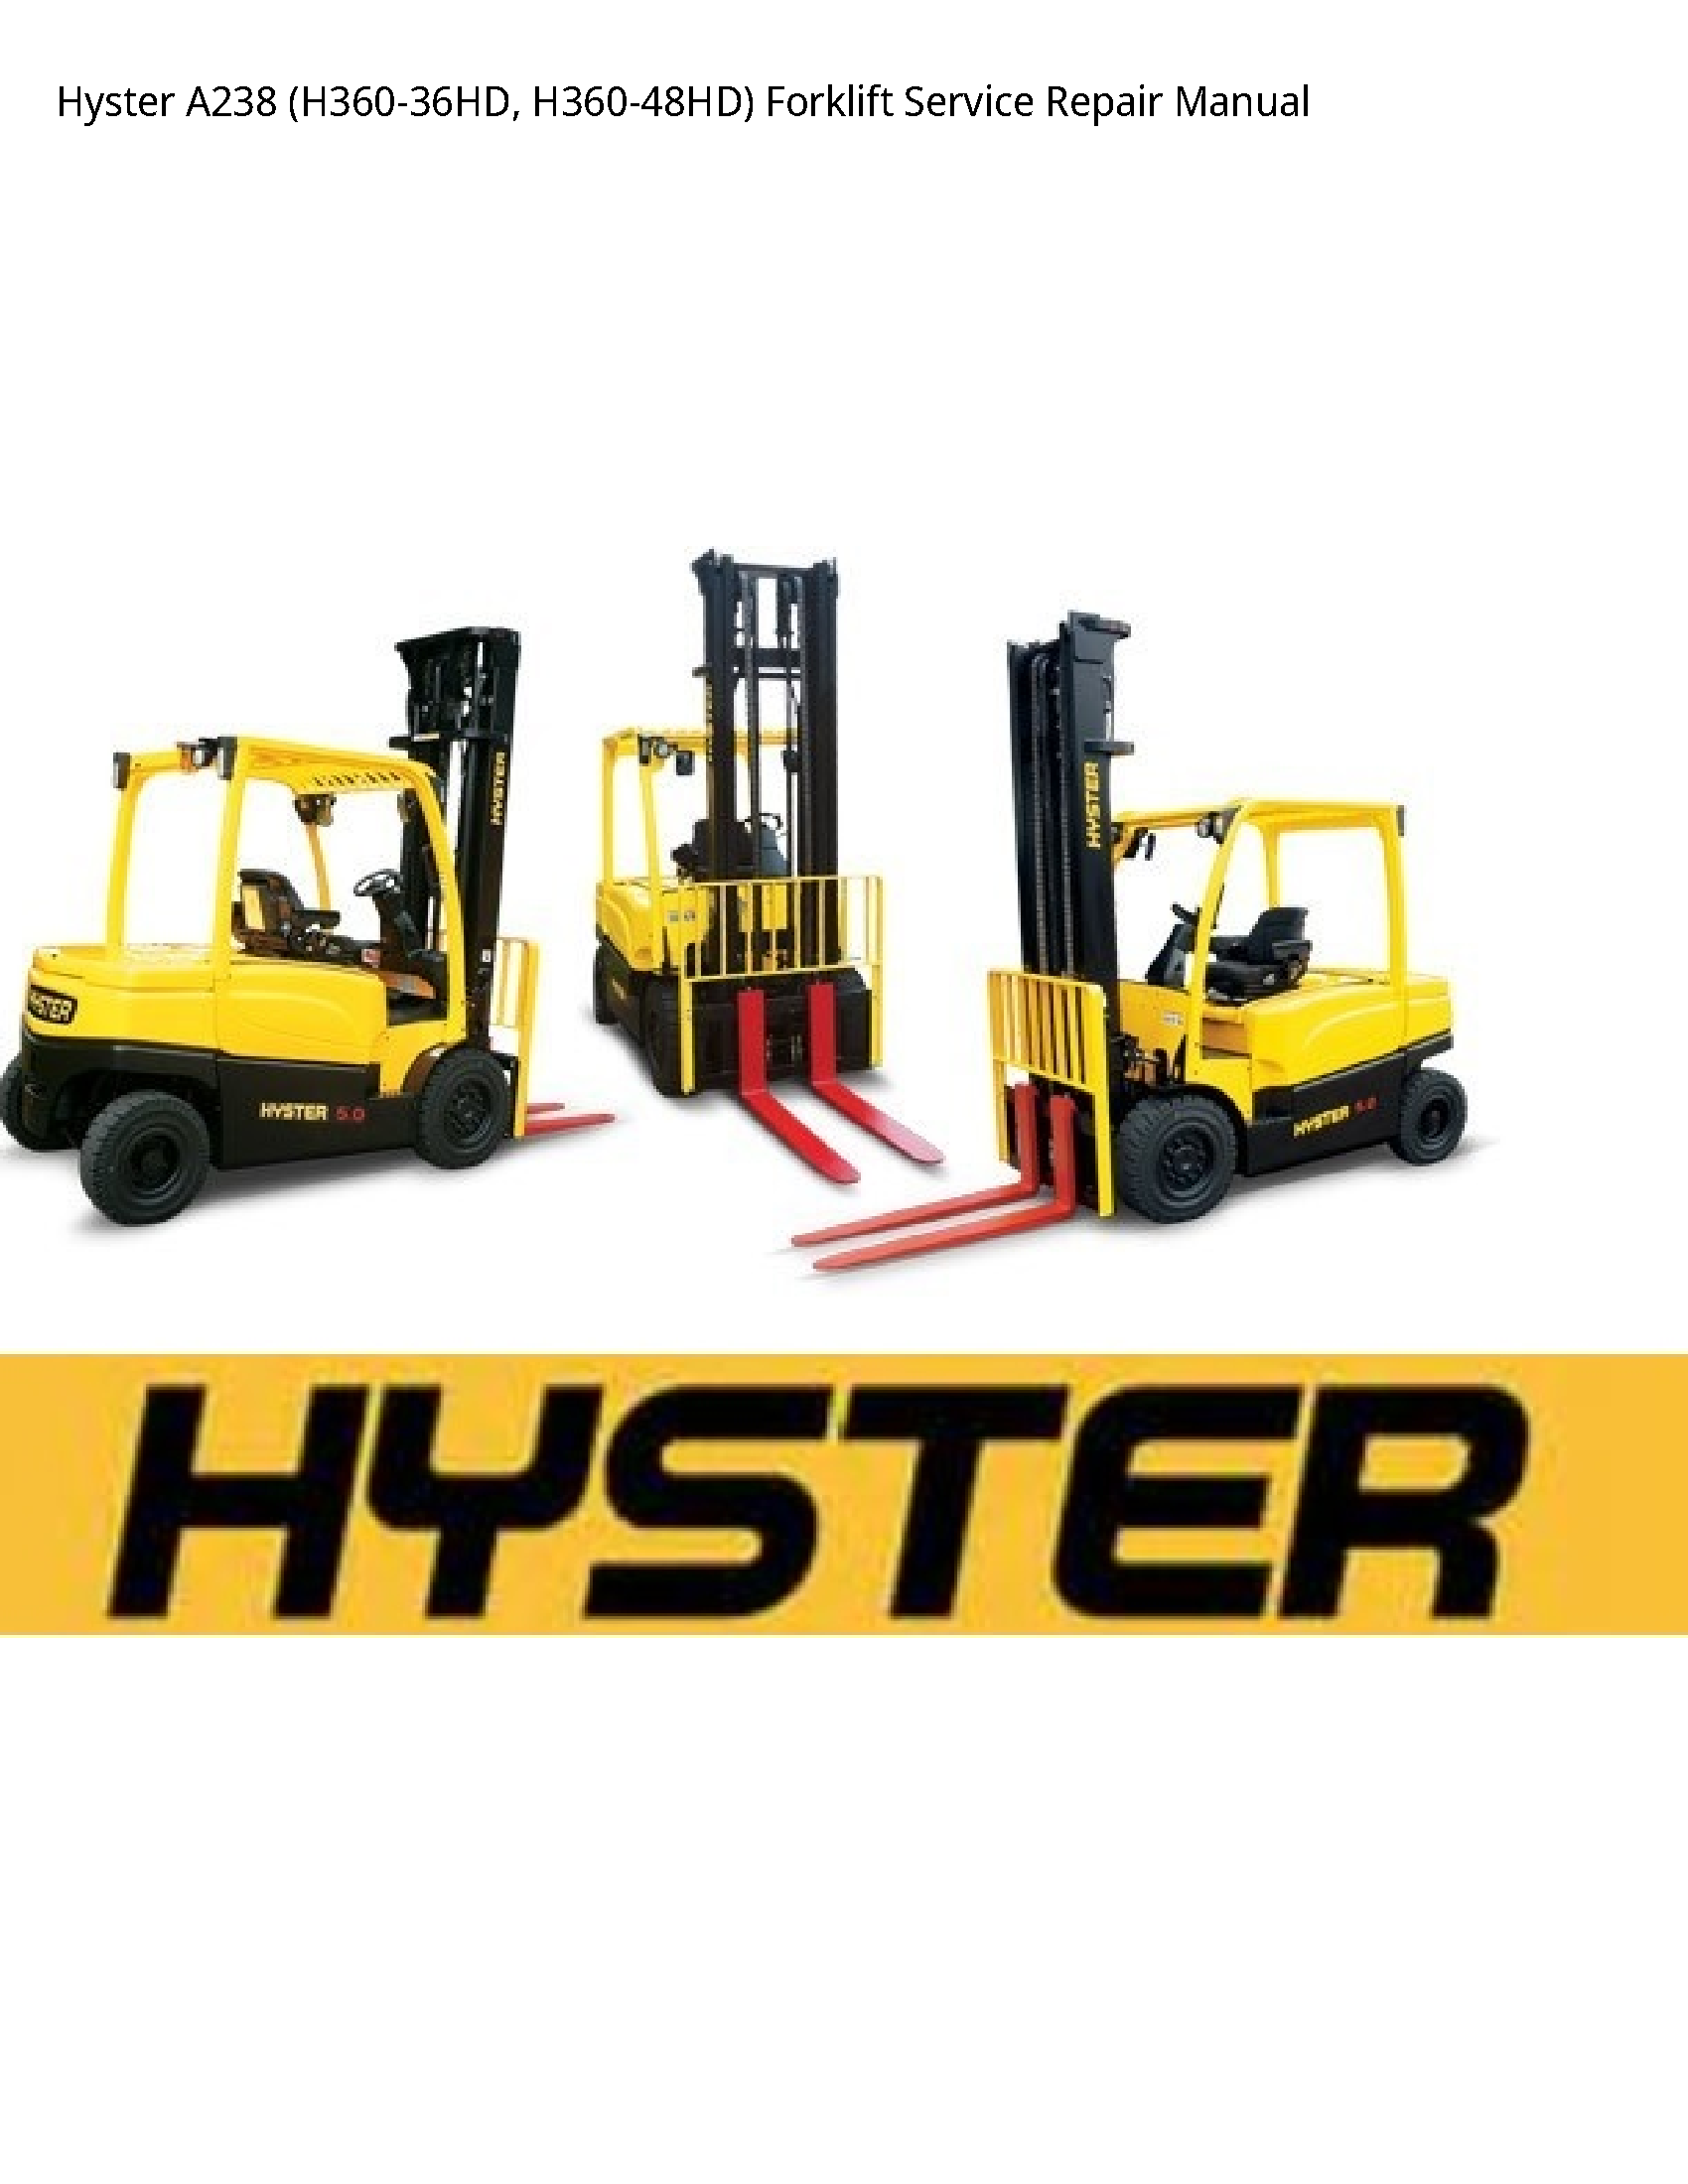 Hyster A238 Forklift manual